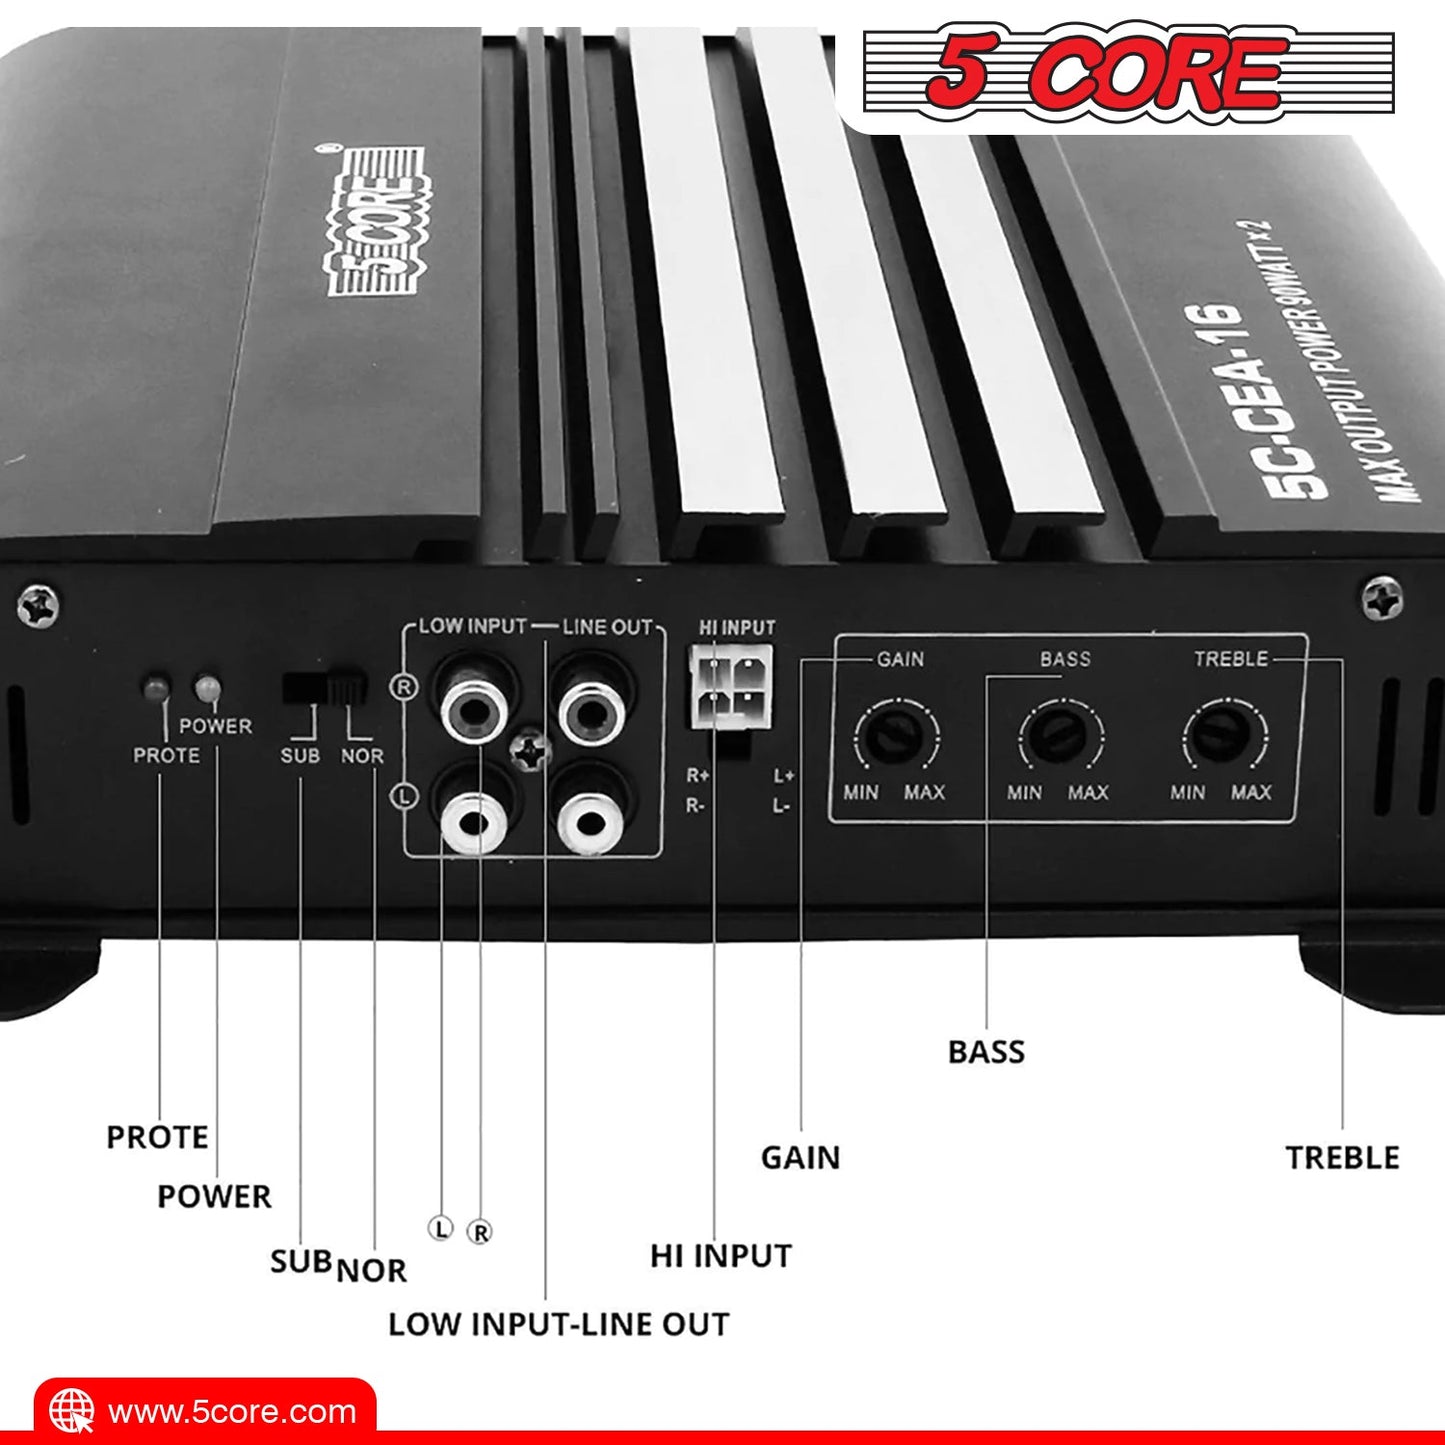 5Core Stereo Car Truck Amplifier 2 Channel Mic Input Amplificador Para